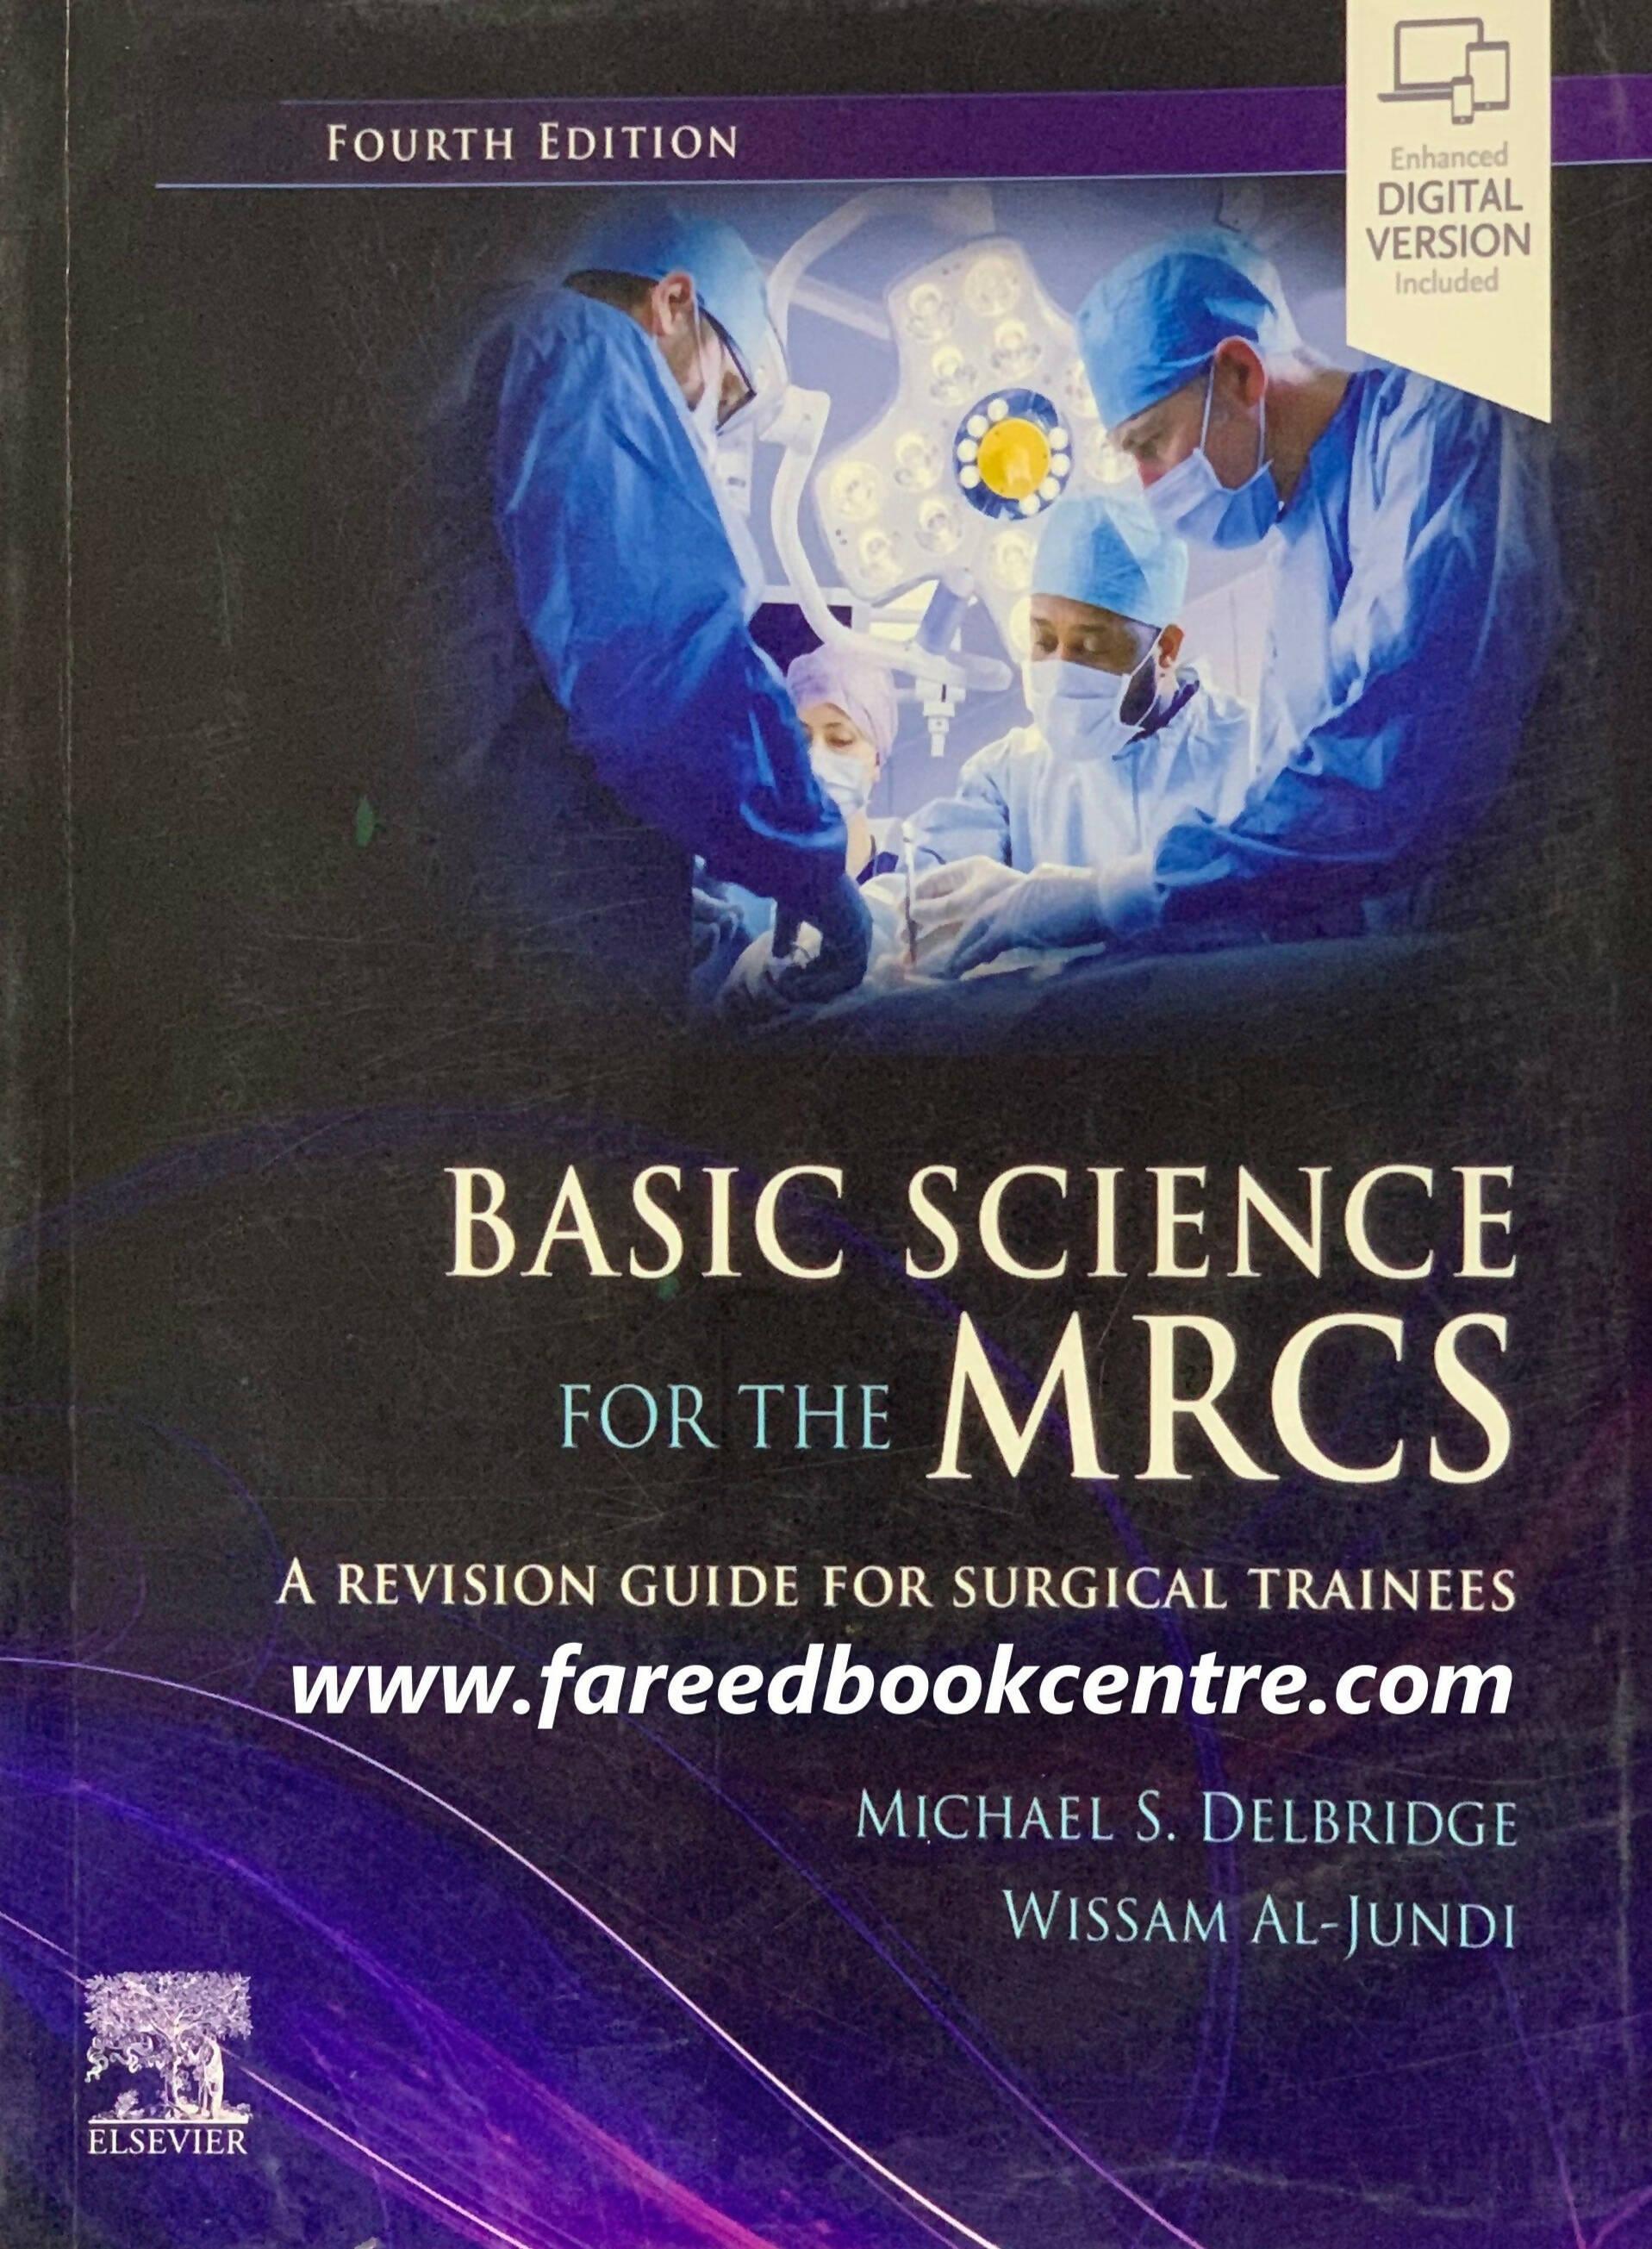 Basic Science For The MRCS By Michael S. Delbridge 4th Edition - ValueBox